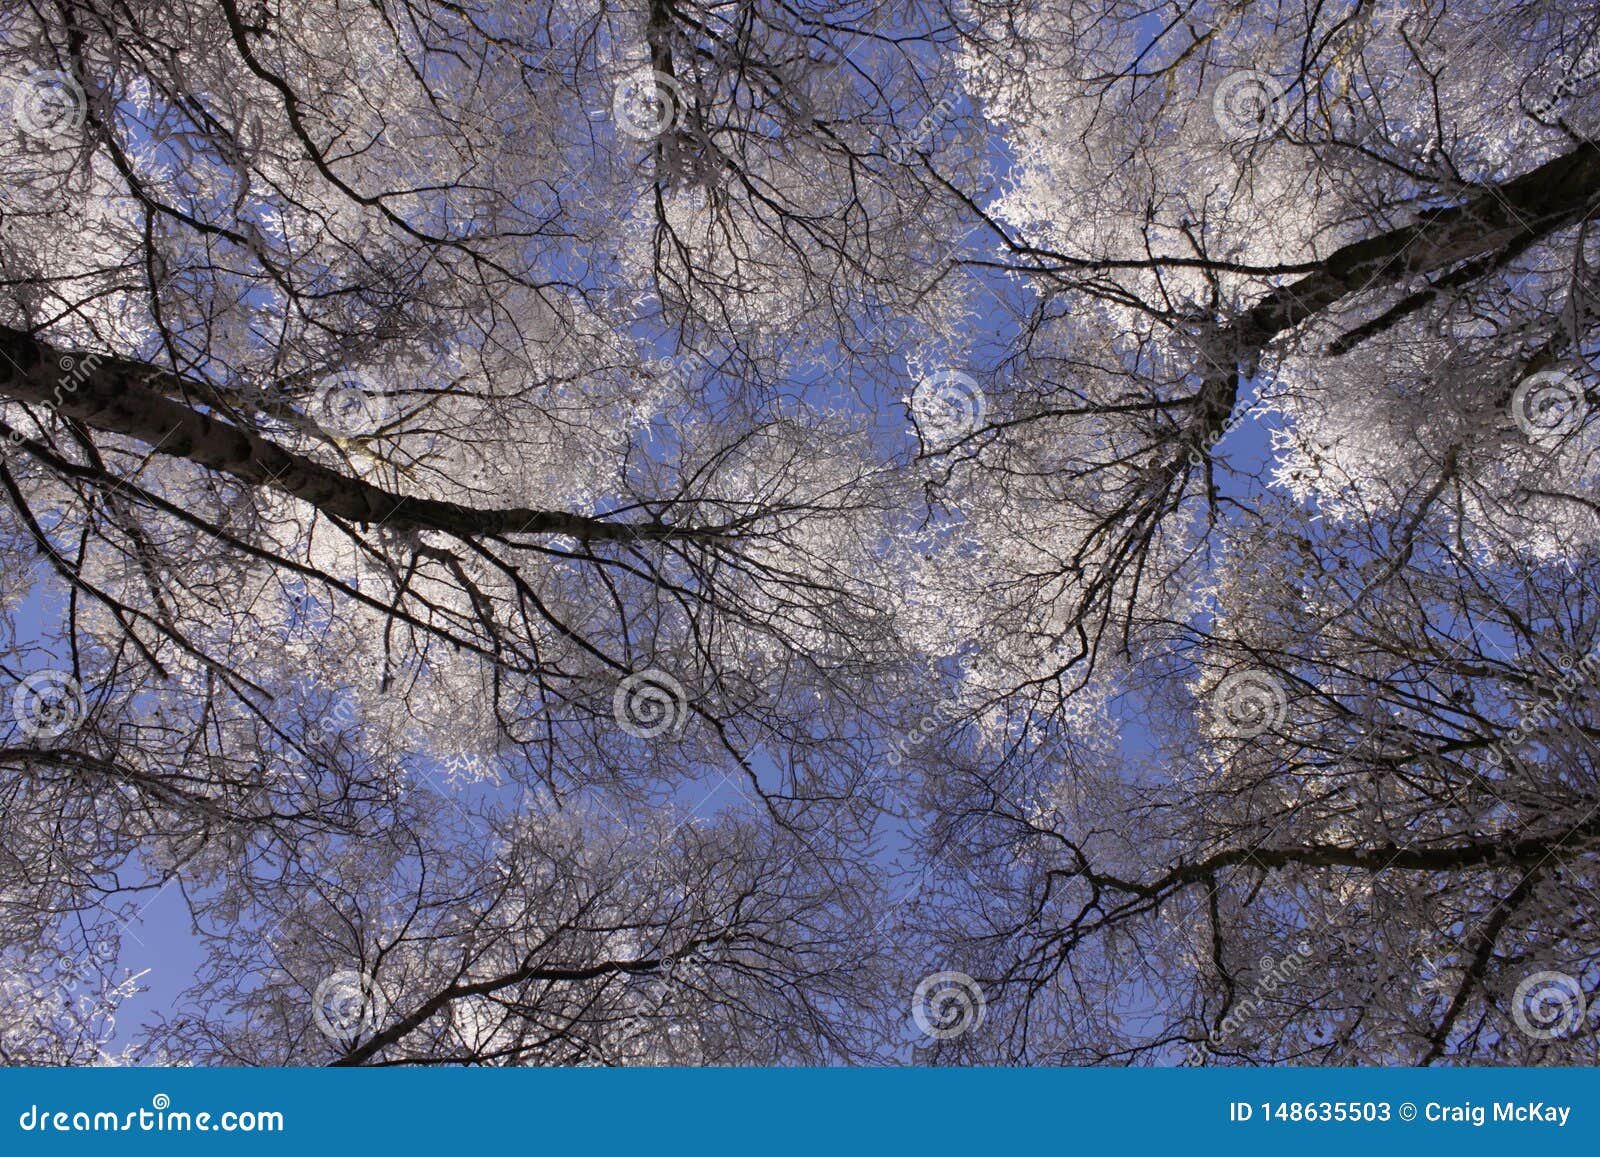 View Up through Tree Branches in Mid Winter with Snow on Branches Stock